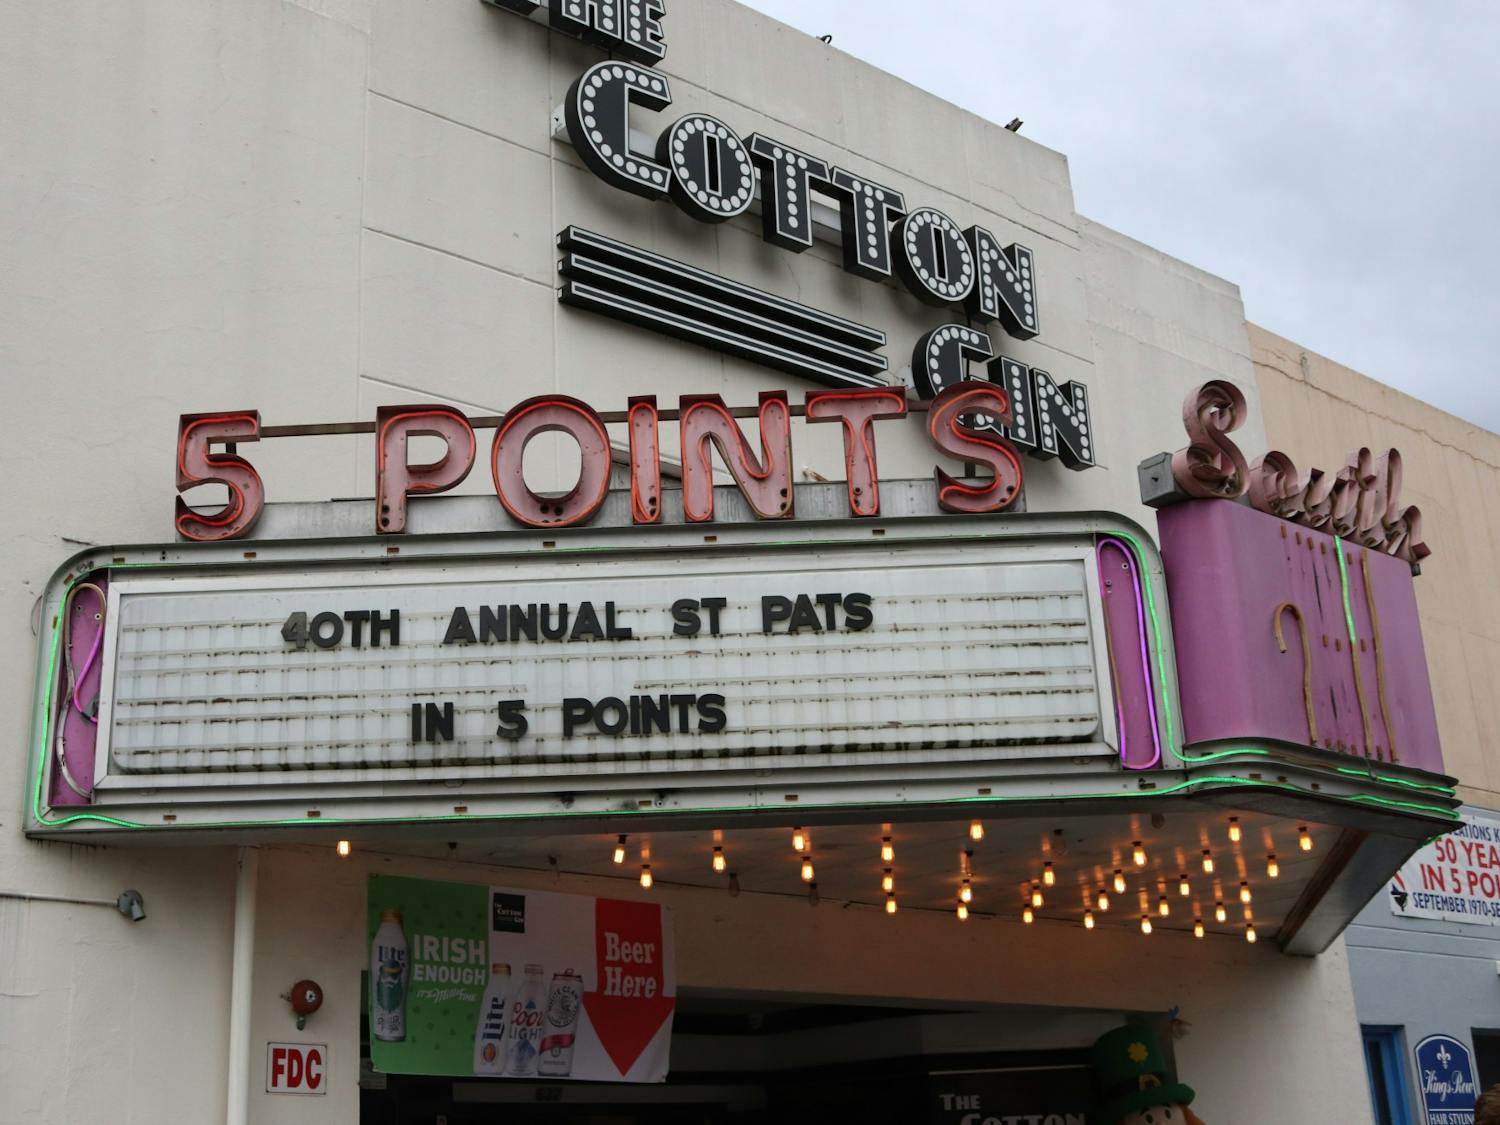 The 5 Points marquee sign announces Saturday’s event, the 40th Annual St. Pats in 5 Points. &nbsp;